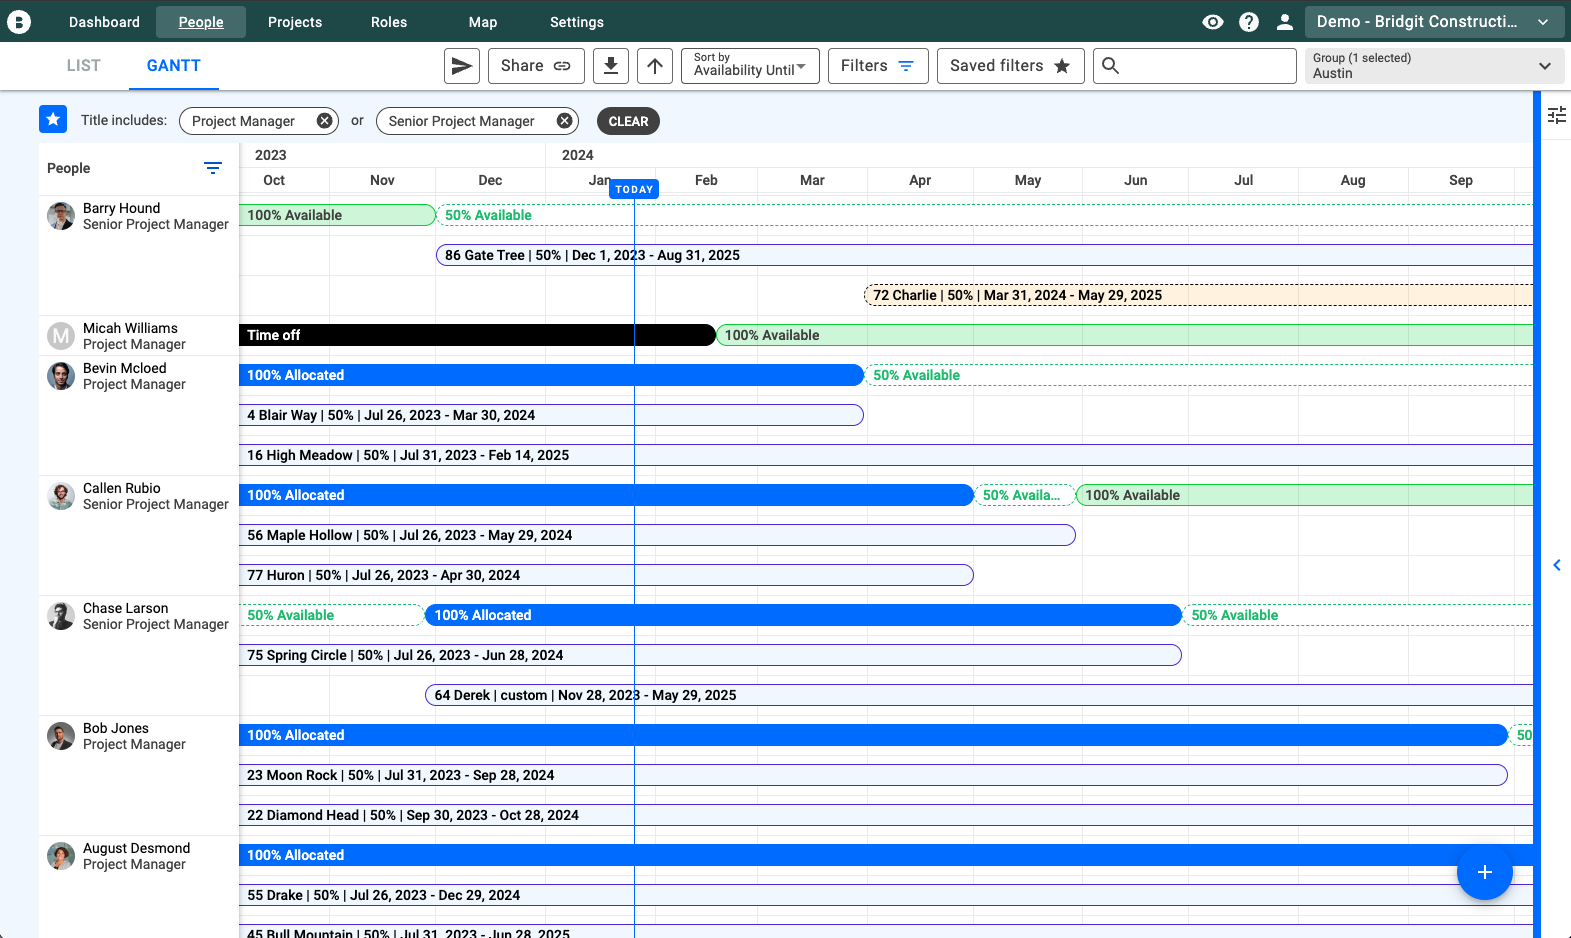 Do you prefer to look at people and their respective projects? No problem. The People Gantt in Bridgit Bench helps provide assignment information and utilization insights. Quickly sort or filter by availability to find underutilized team members.